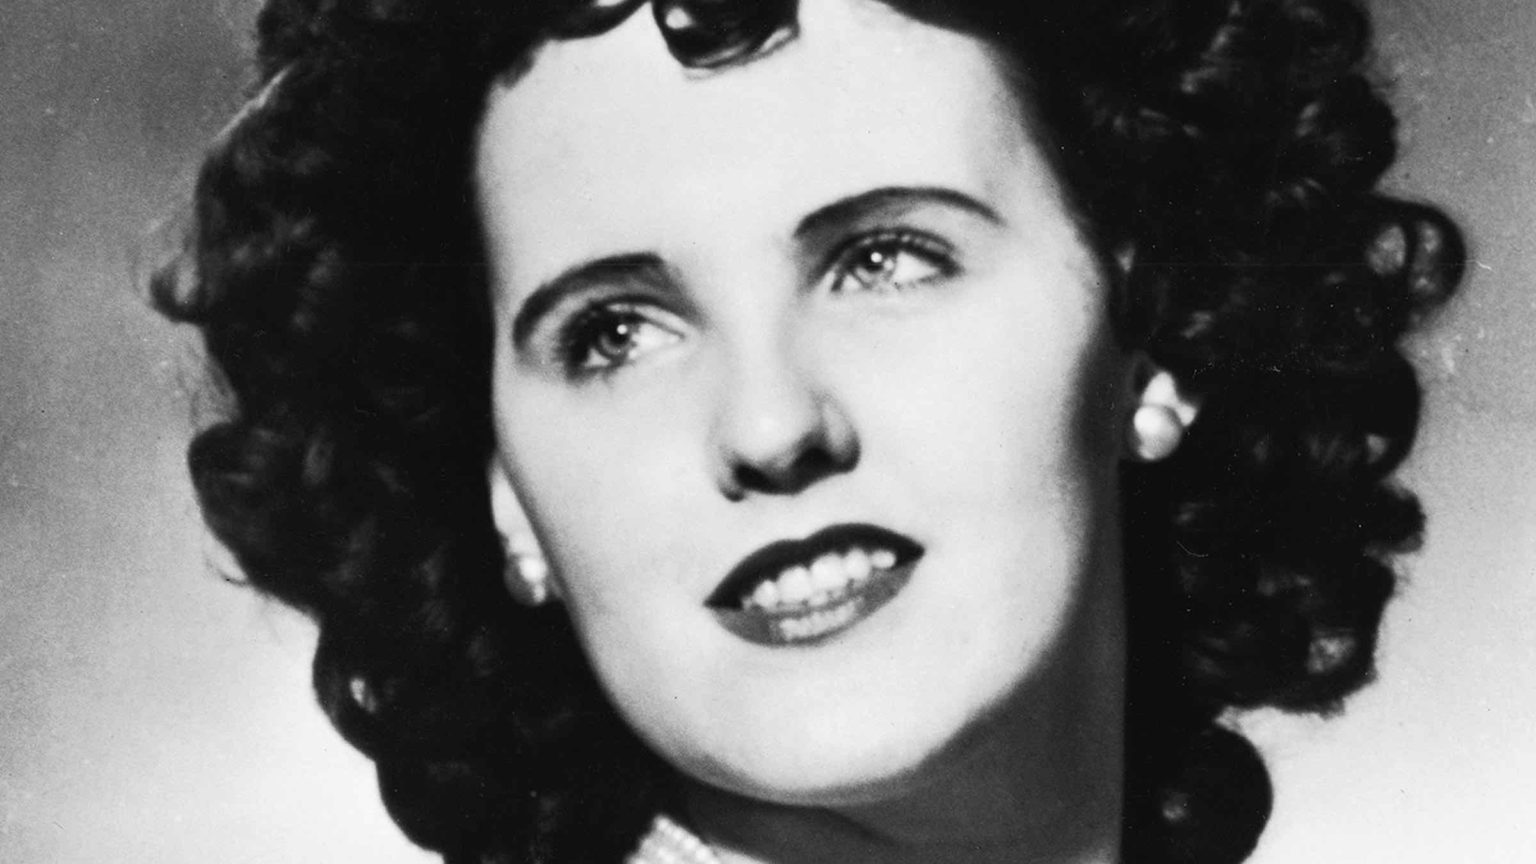 The Black Dahlia murder is one of the most infamous in Hollywood. We dive into the infamous story behind Black Dahlia.